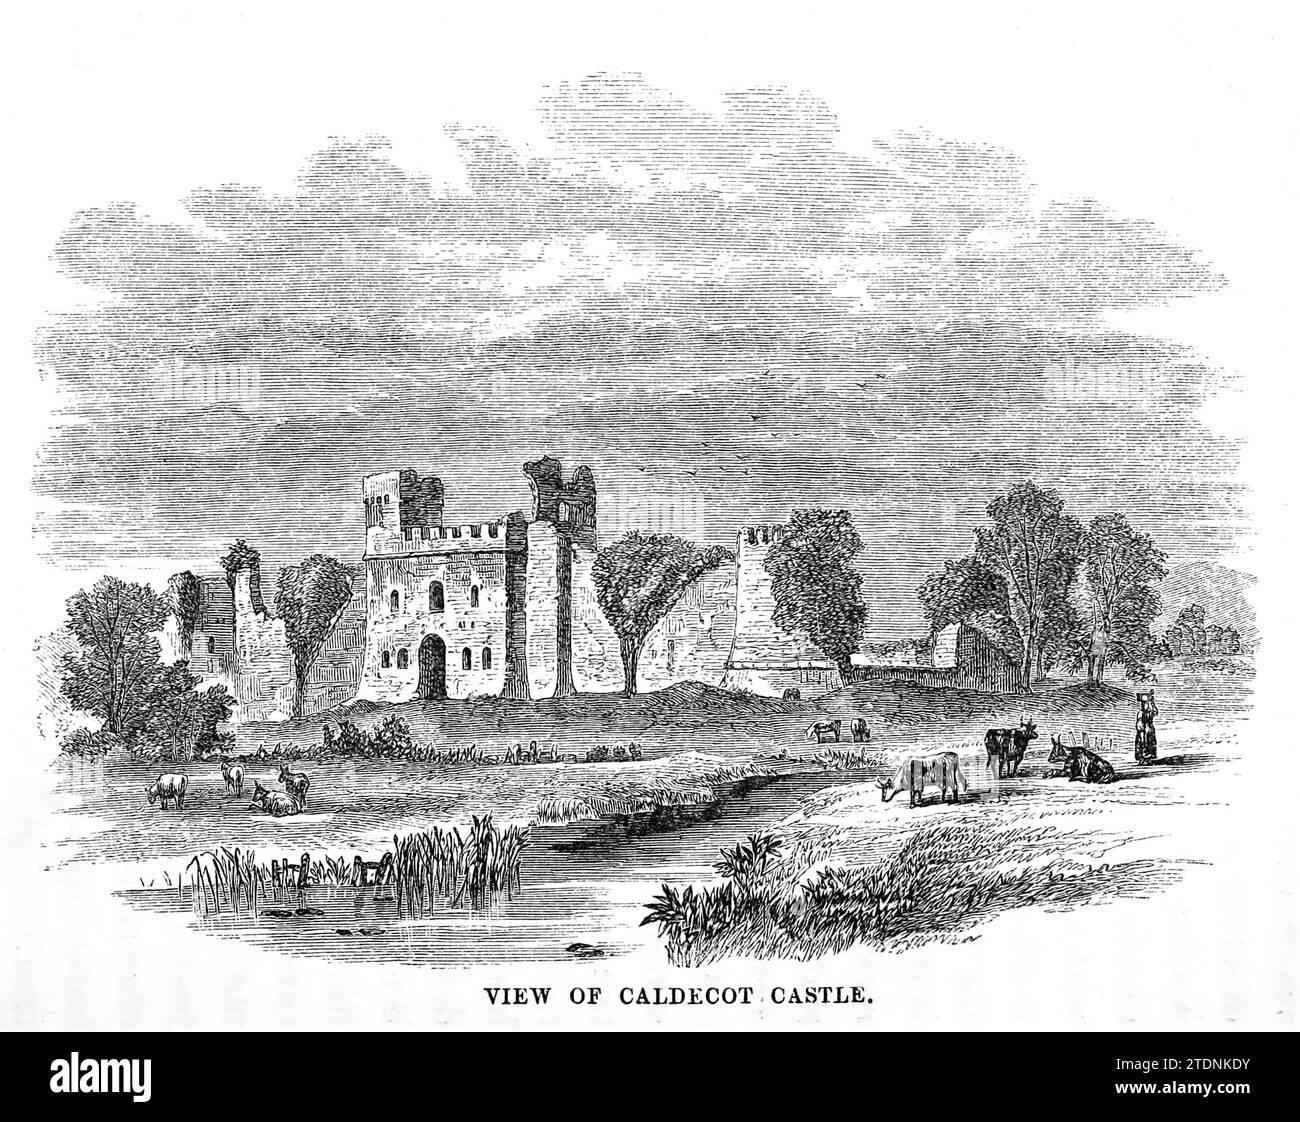 View of Caldecot Castle, Caldicot Castle (Welsh: Castell Cil-y-coed) is an extensive stone medieval castle in the town of Caldicot, Monmouthshire, in southeast Wales, from the book The Severn valley: a series of sketches, descriptive and pictorial, of the course of the Severn: containing notices of its topographical, industrial, and geological features; with glances at its historical and legendary associations by Randall, John, 1810-1910 Publication date 1862 Publisher J. S. Virtue Stock Photo